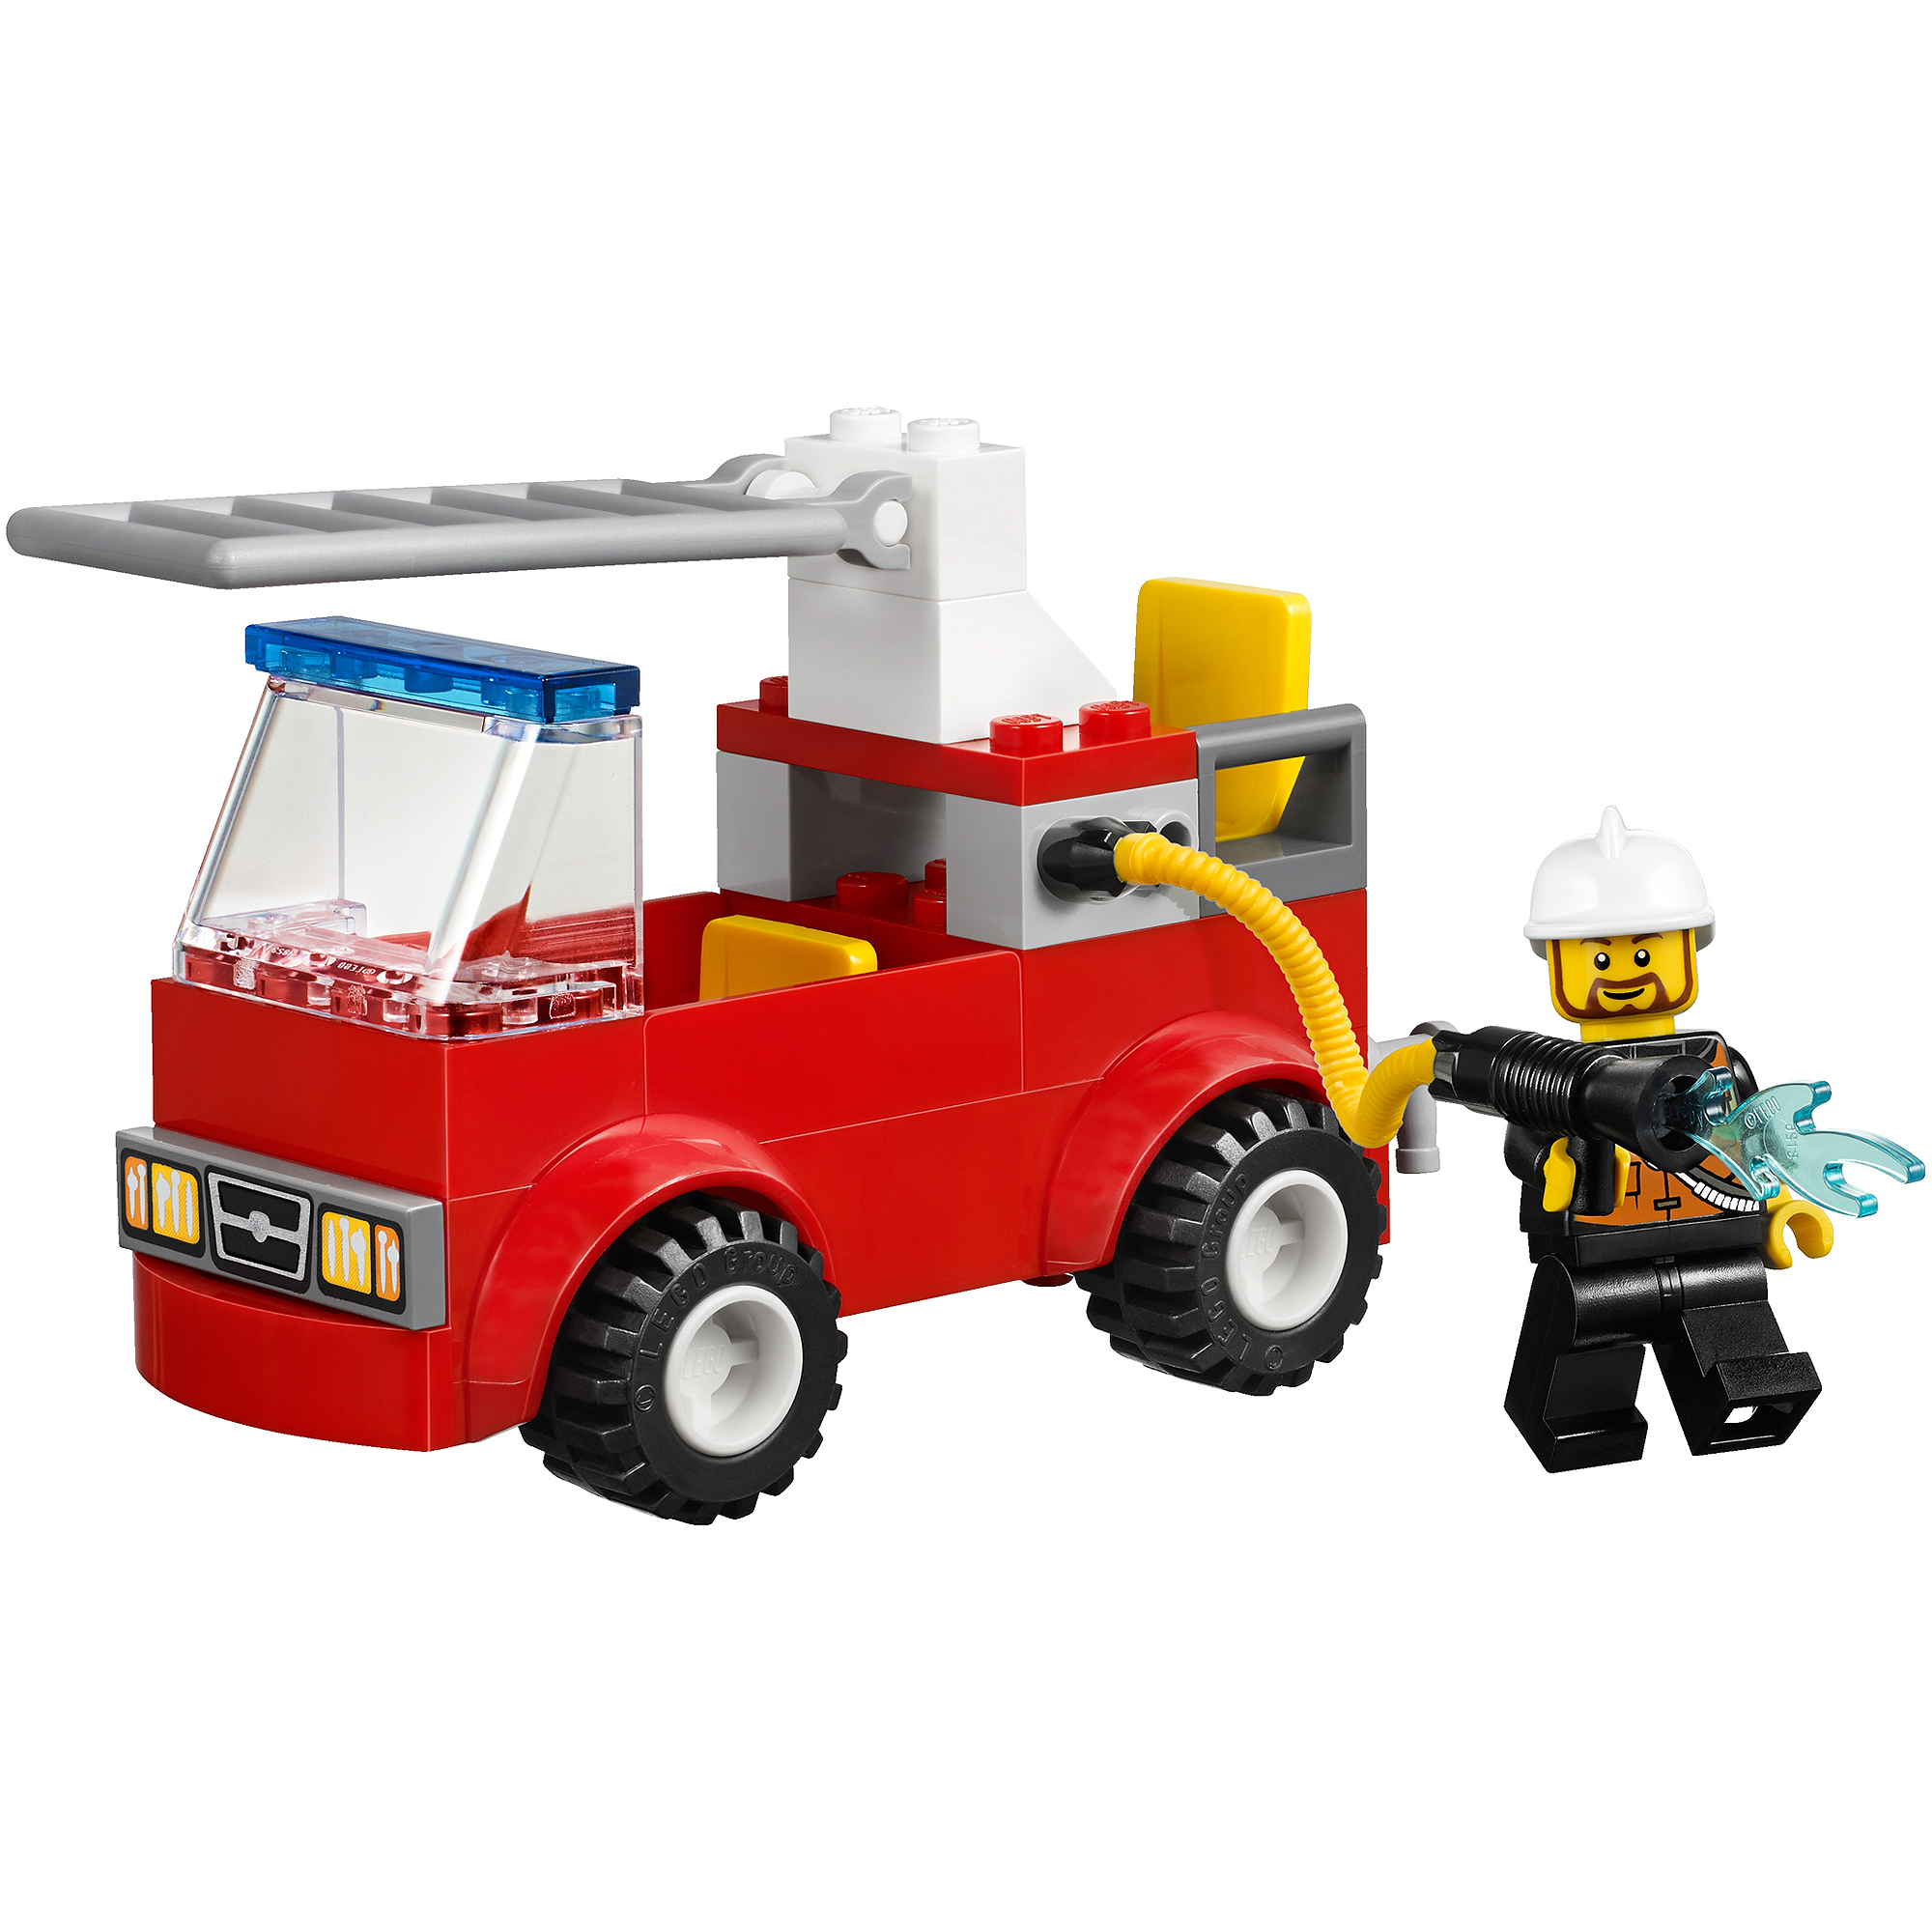 LEGO Juniors Fire Emergency - image 1 of 7